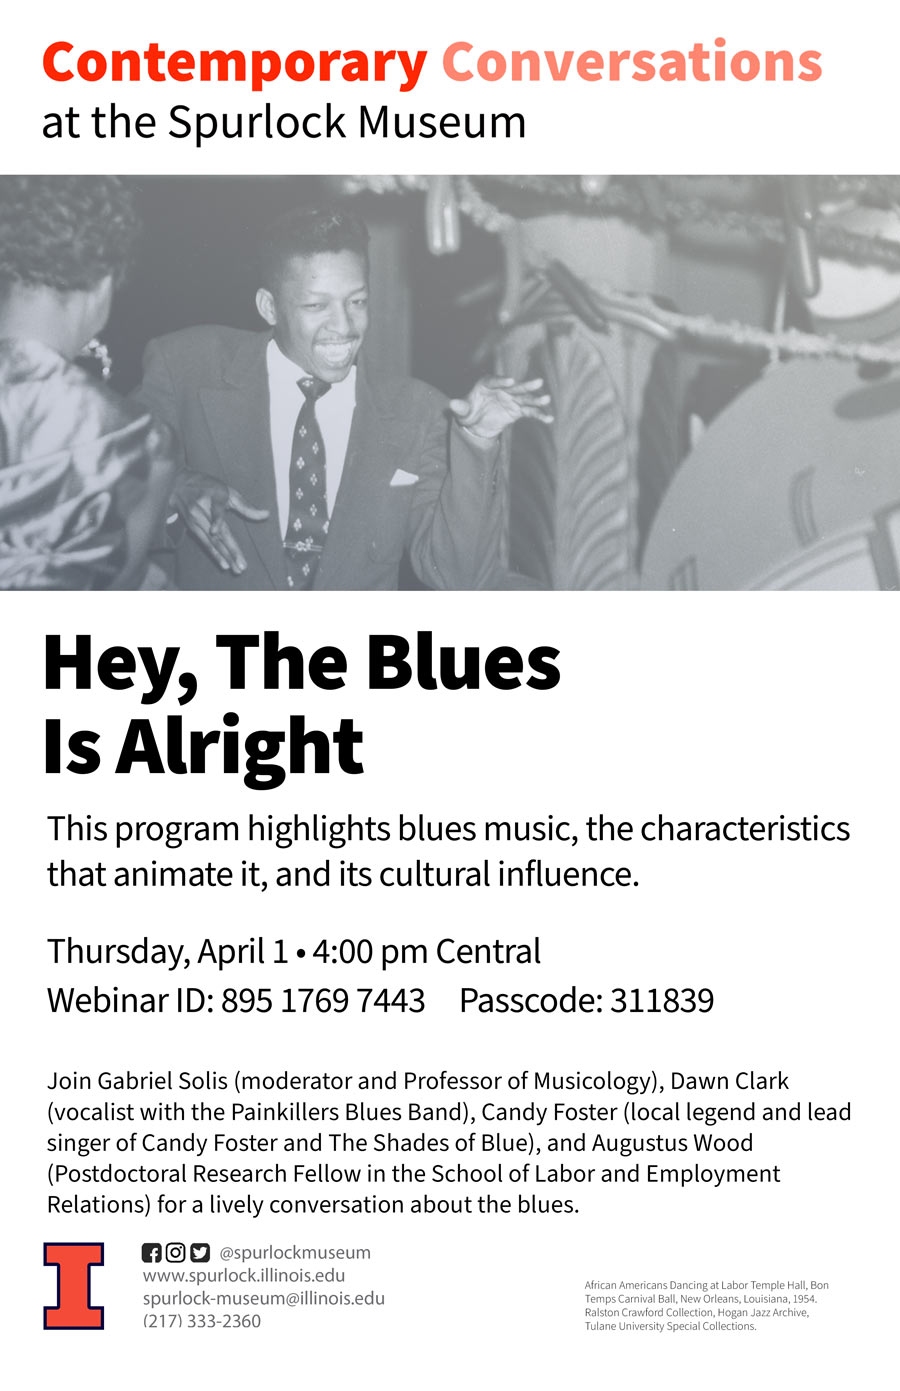 flyer for the Hey, the Blues is Alright event